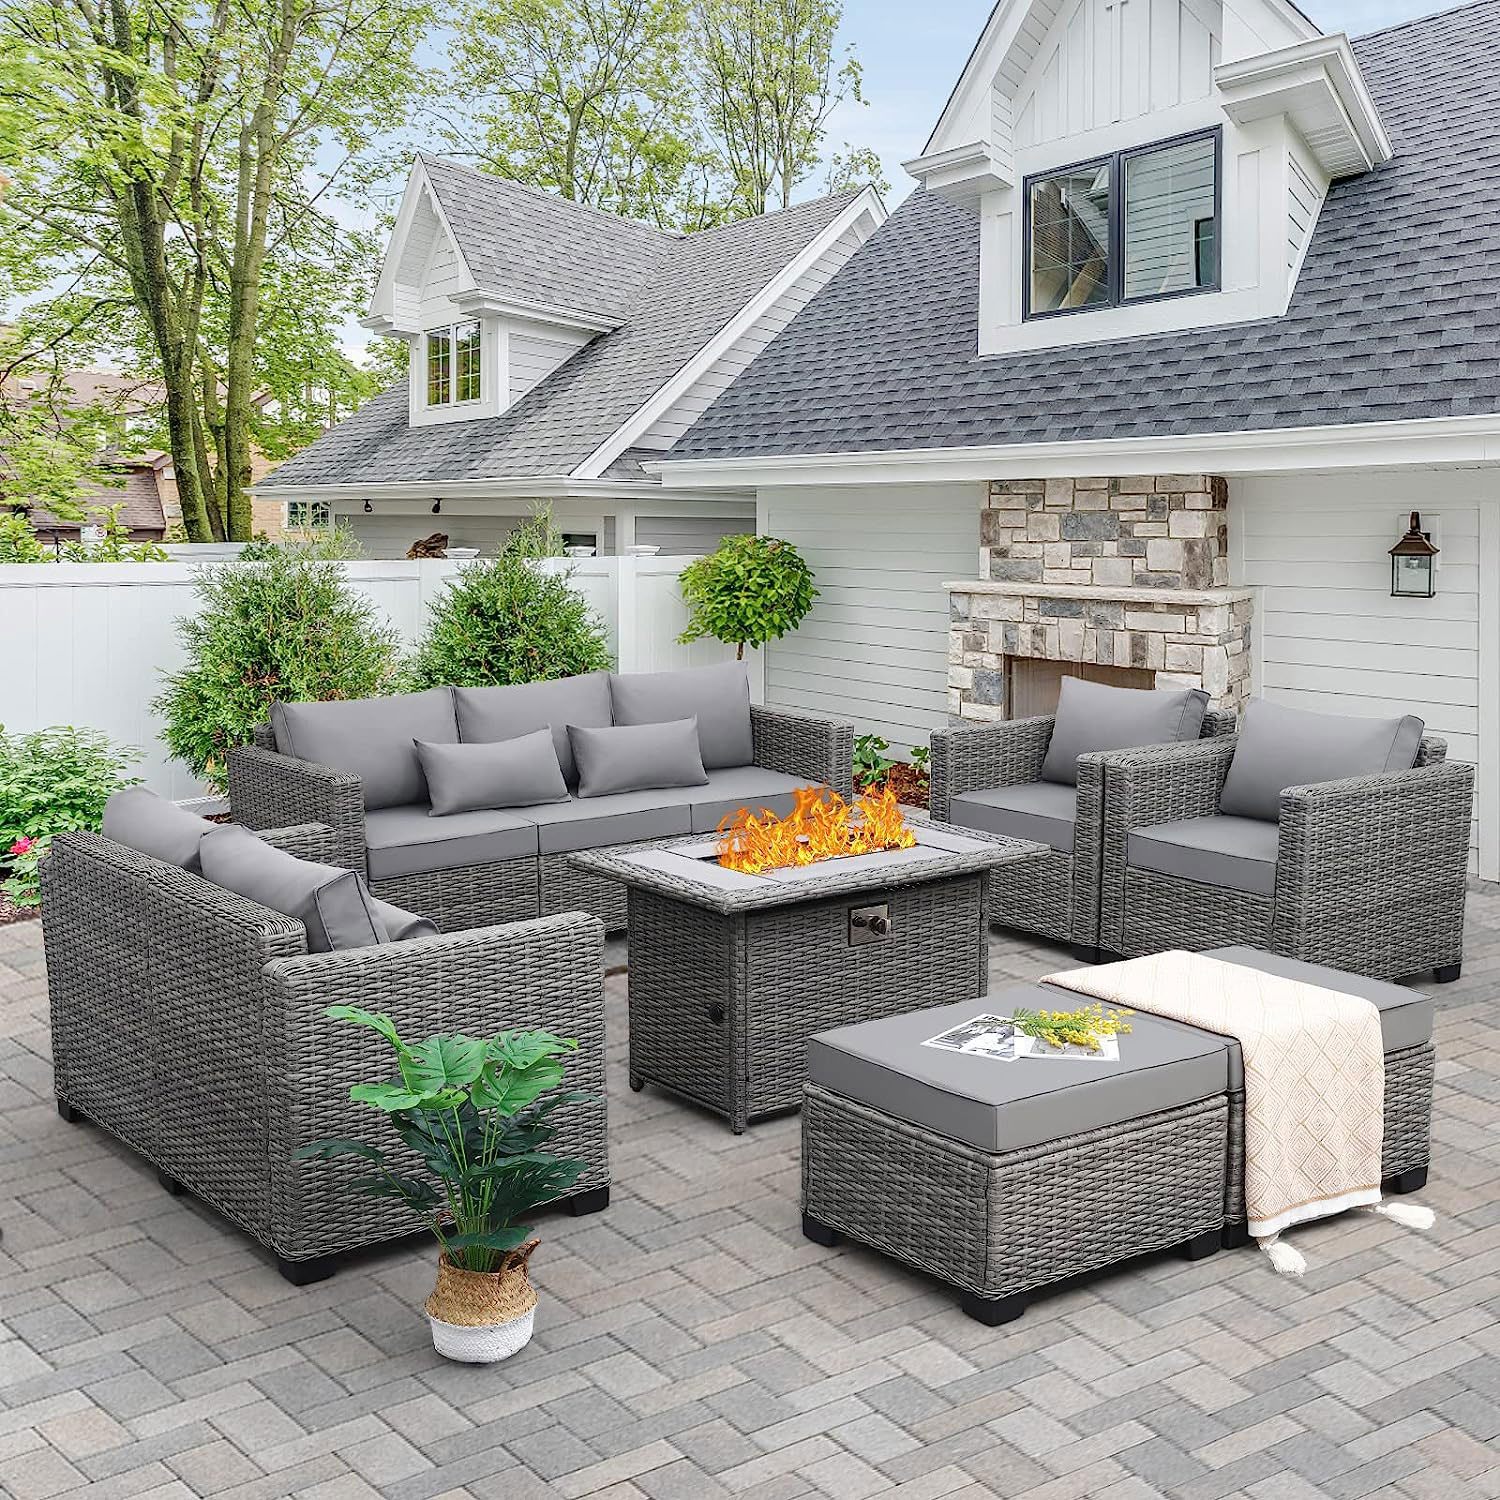 A 7-piece Rattaner fire pit patio furniture set in grey, featuring outdoor chairs, a 45-inch couch, and a wicker propane fire pit table.